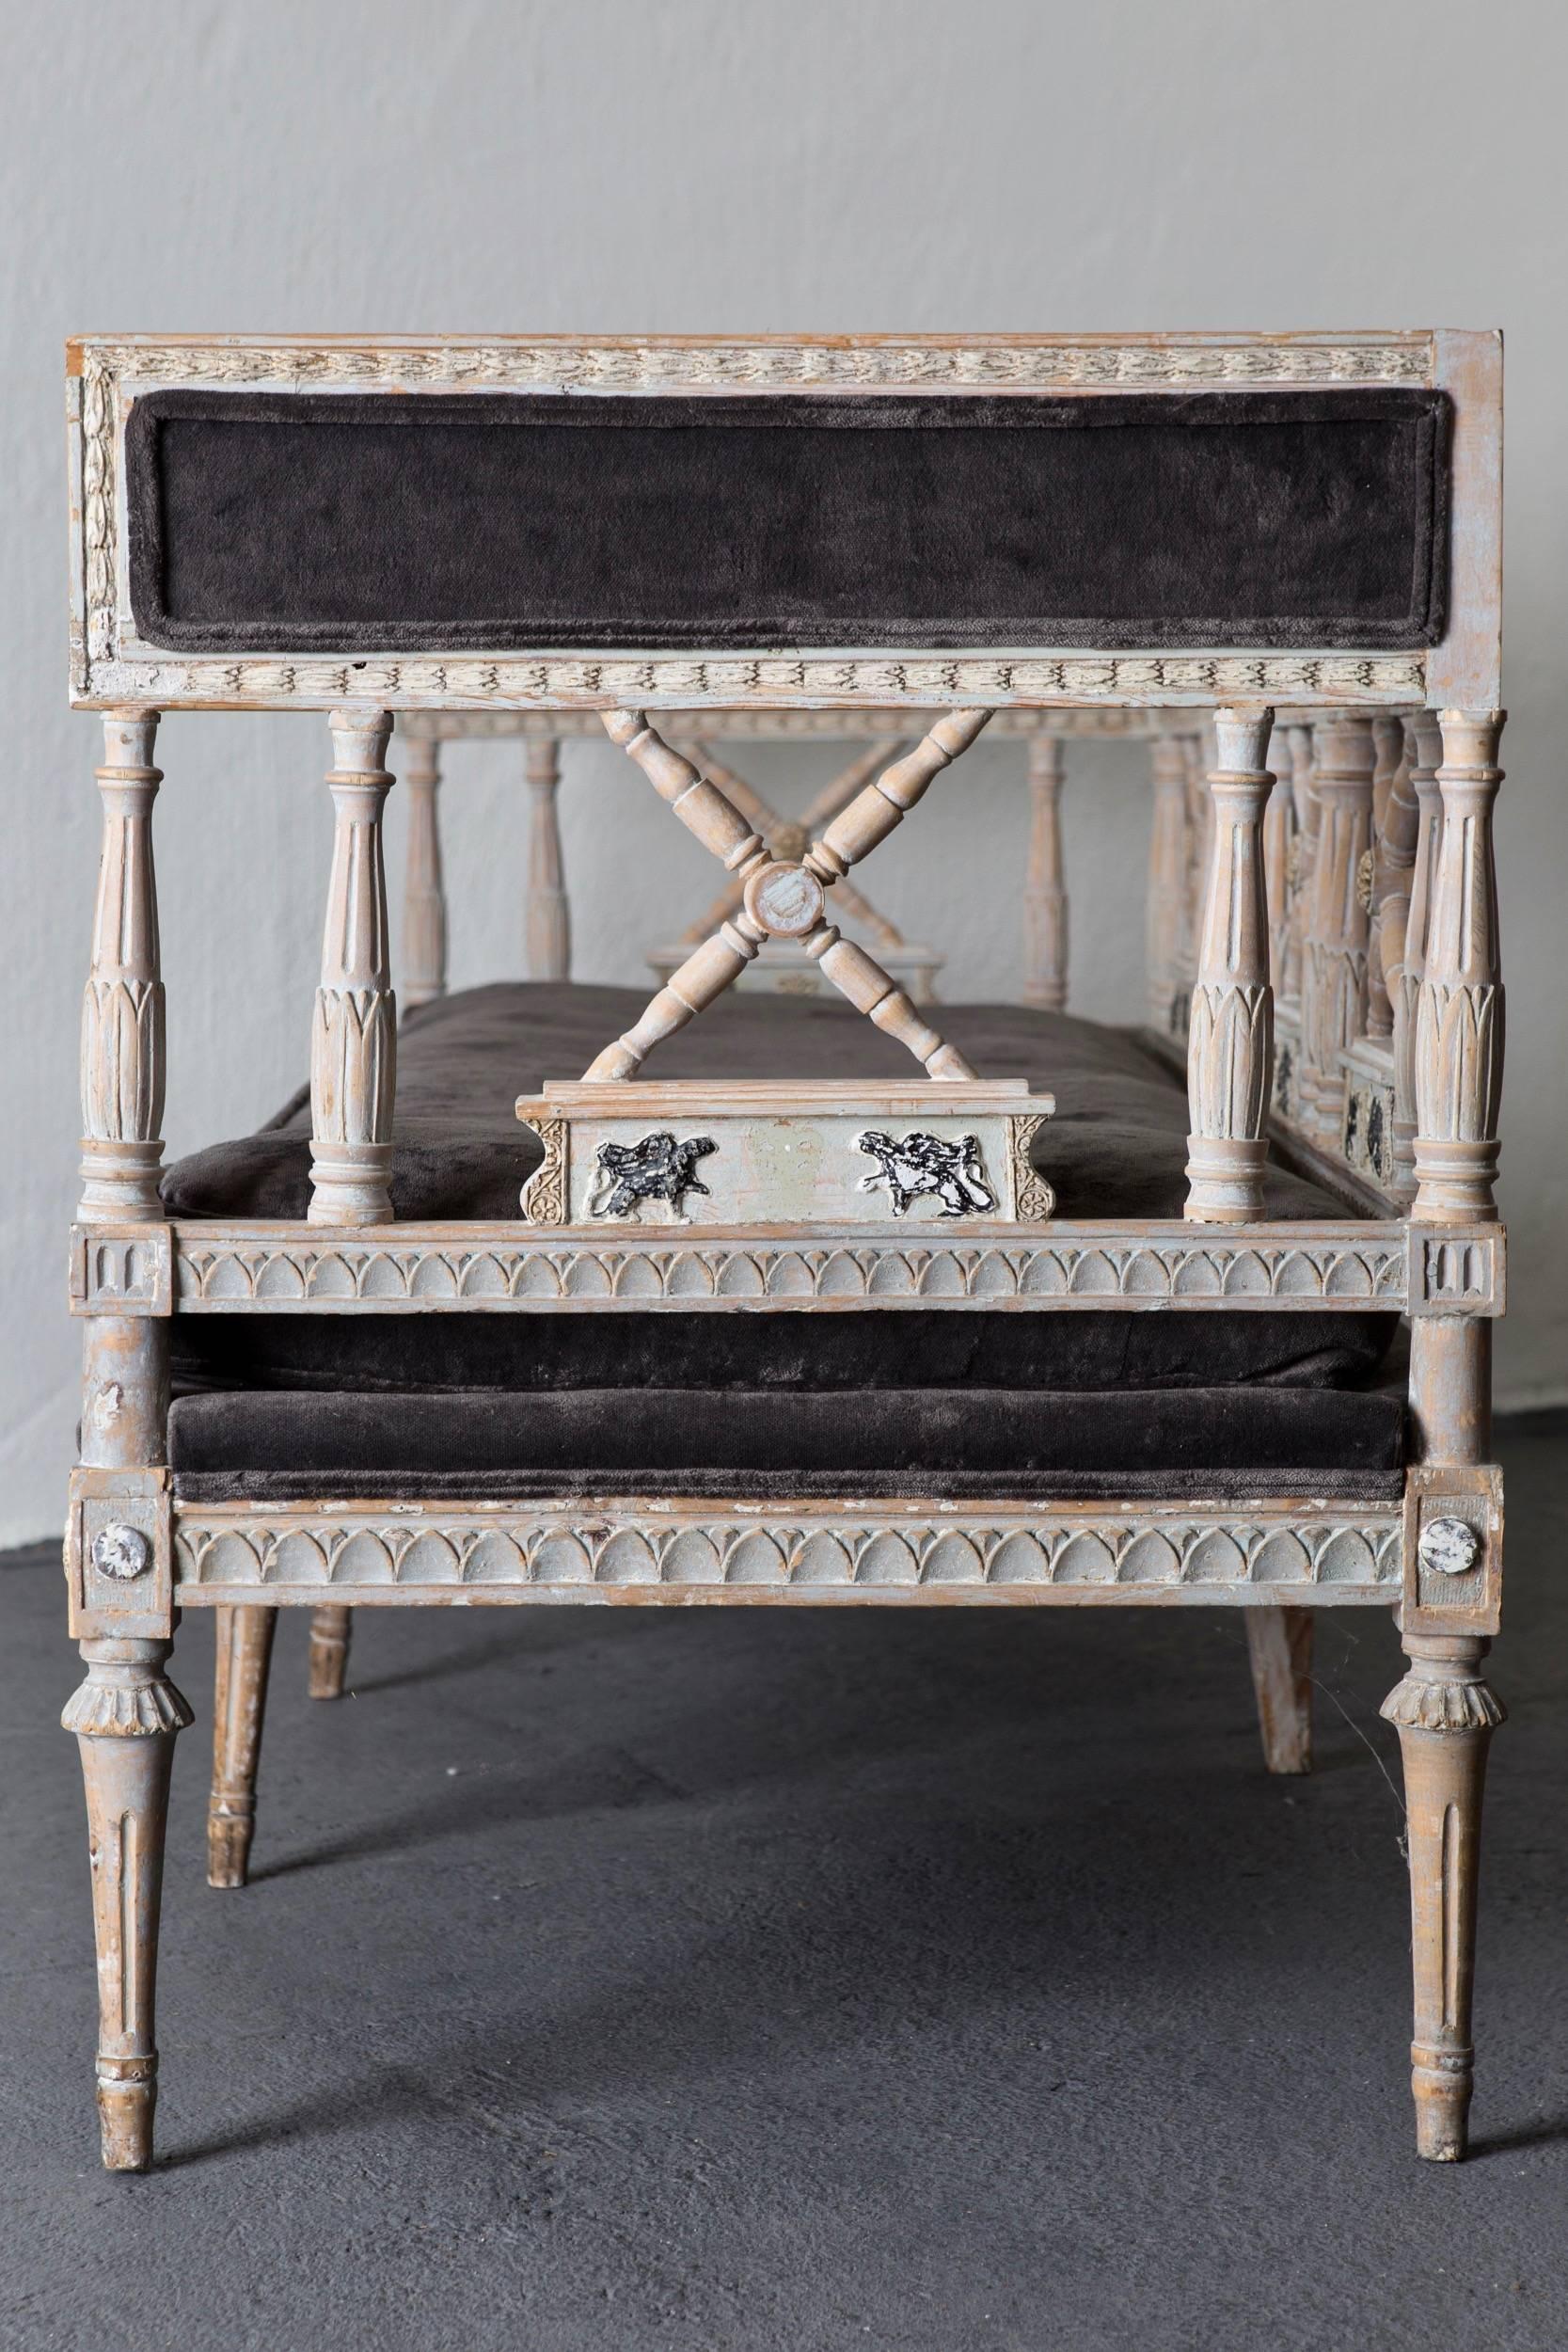 Sofa Bench Long Swedish Neoclassical Original Paint, Early 19th Century, Sweden 3